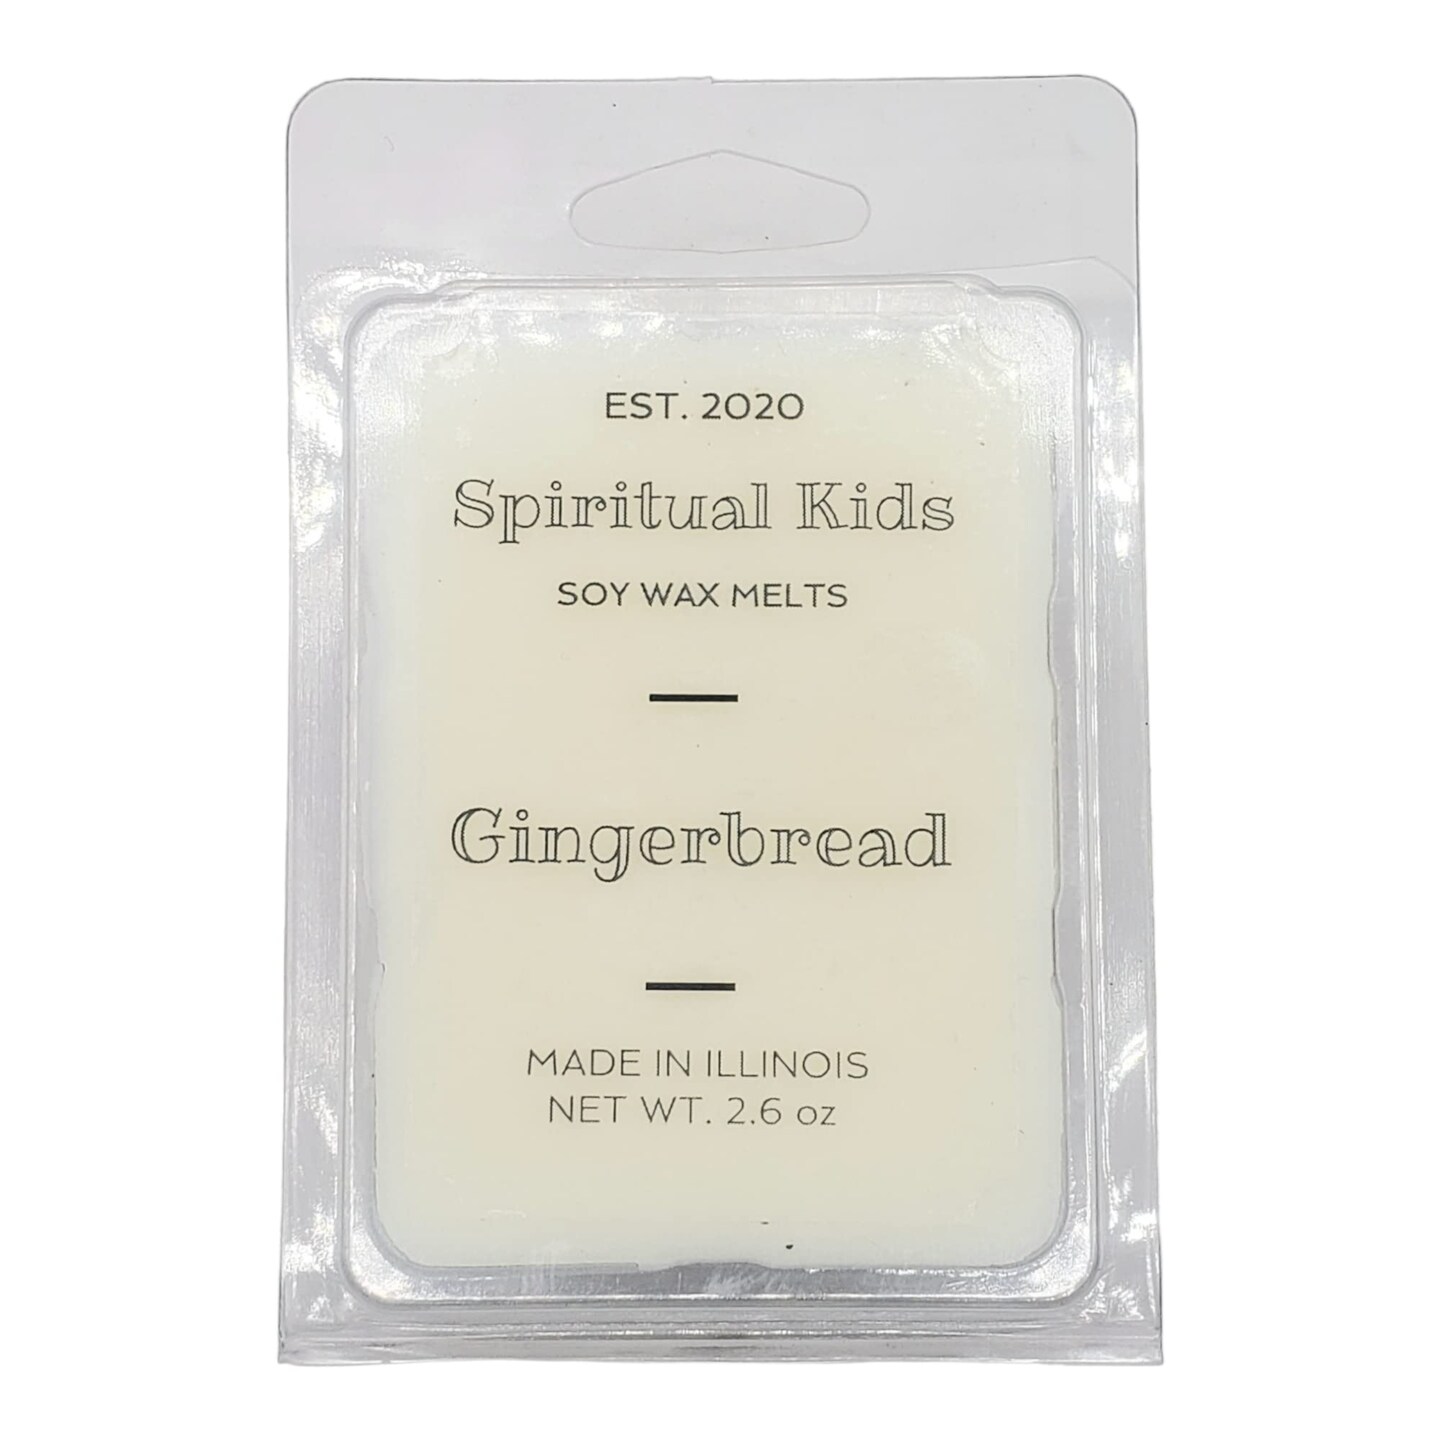 Gingerbread Soy Wax Melts 2.6oz 6 cubes Hand Poured with Fragrant/Essential Oils! | Food Scented Wax Melts